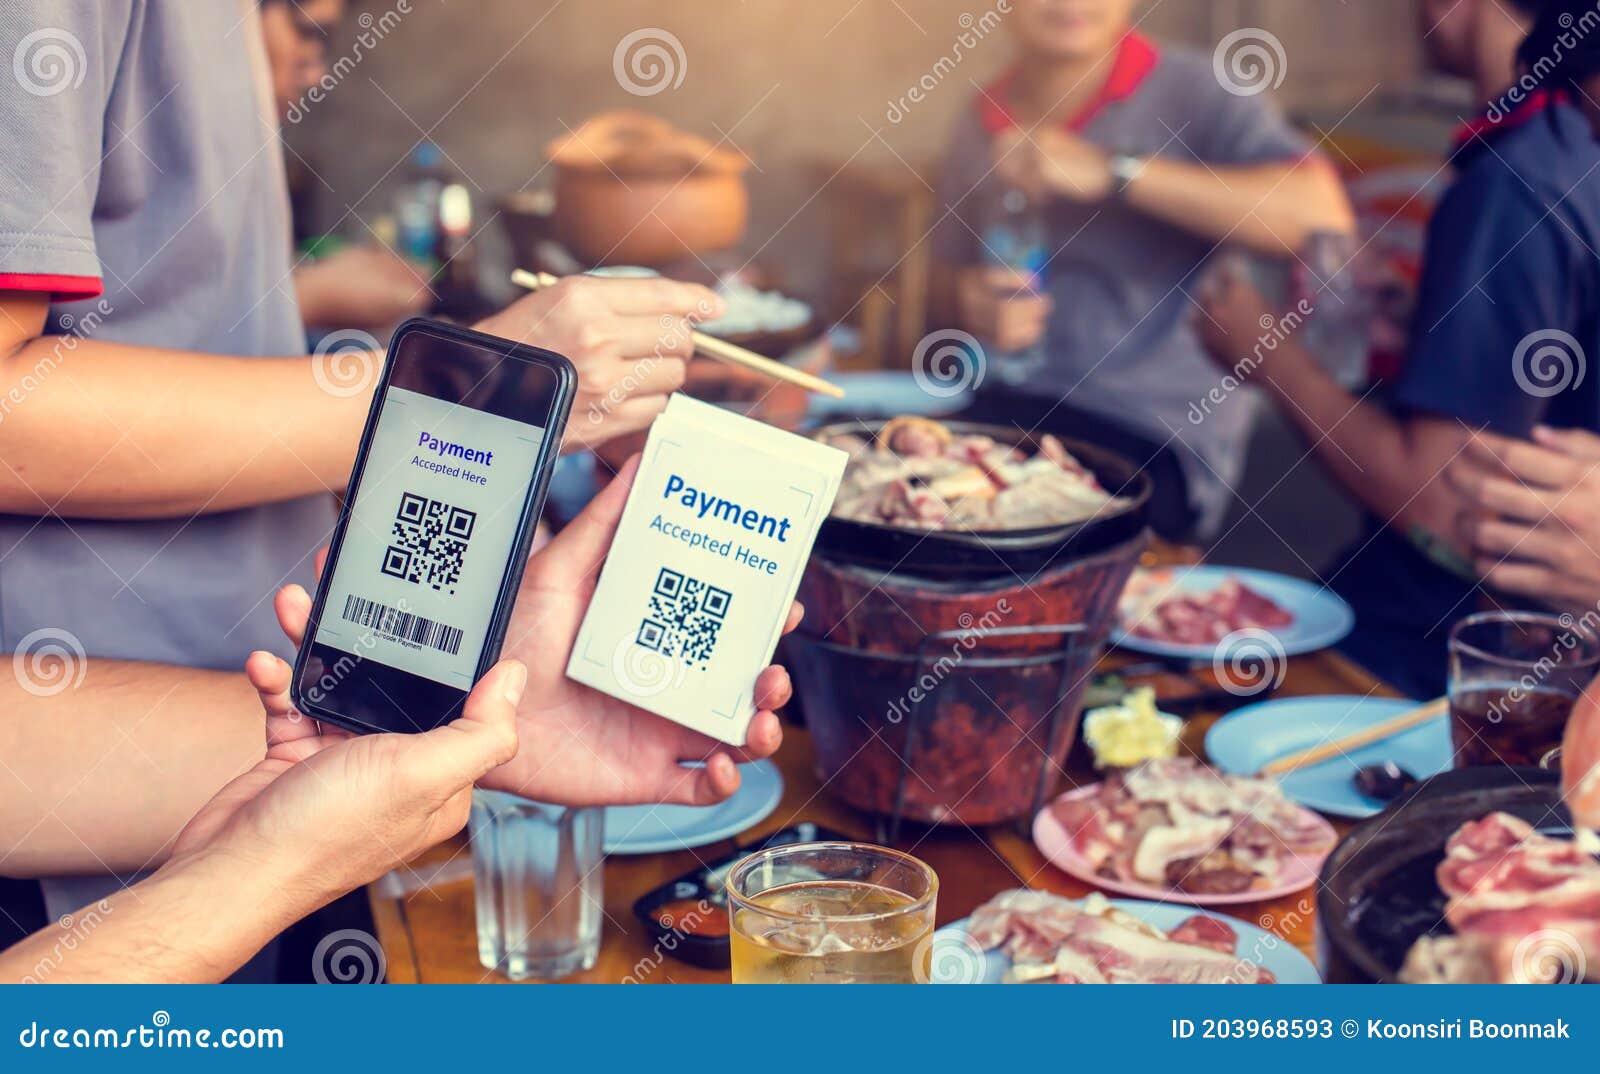 Holding Smartphone To Qr Code Payment Tag with Blurry Grilled Pork and Meat on the Stove, Thai Food Payment Tag Stock Image - Image of cook, barbecue: 203968593